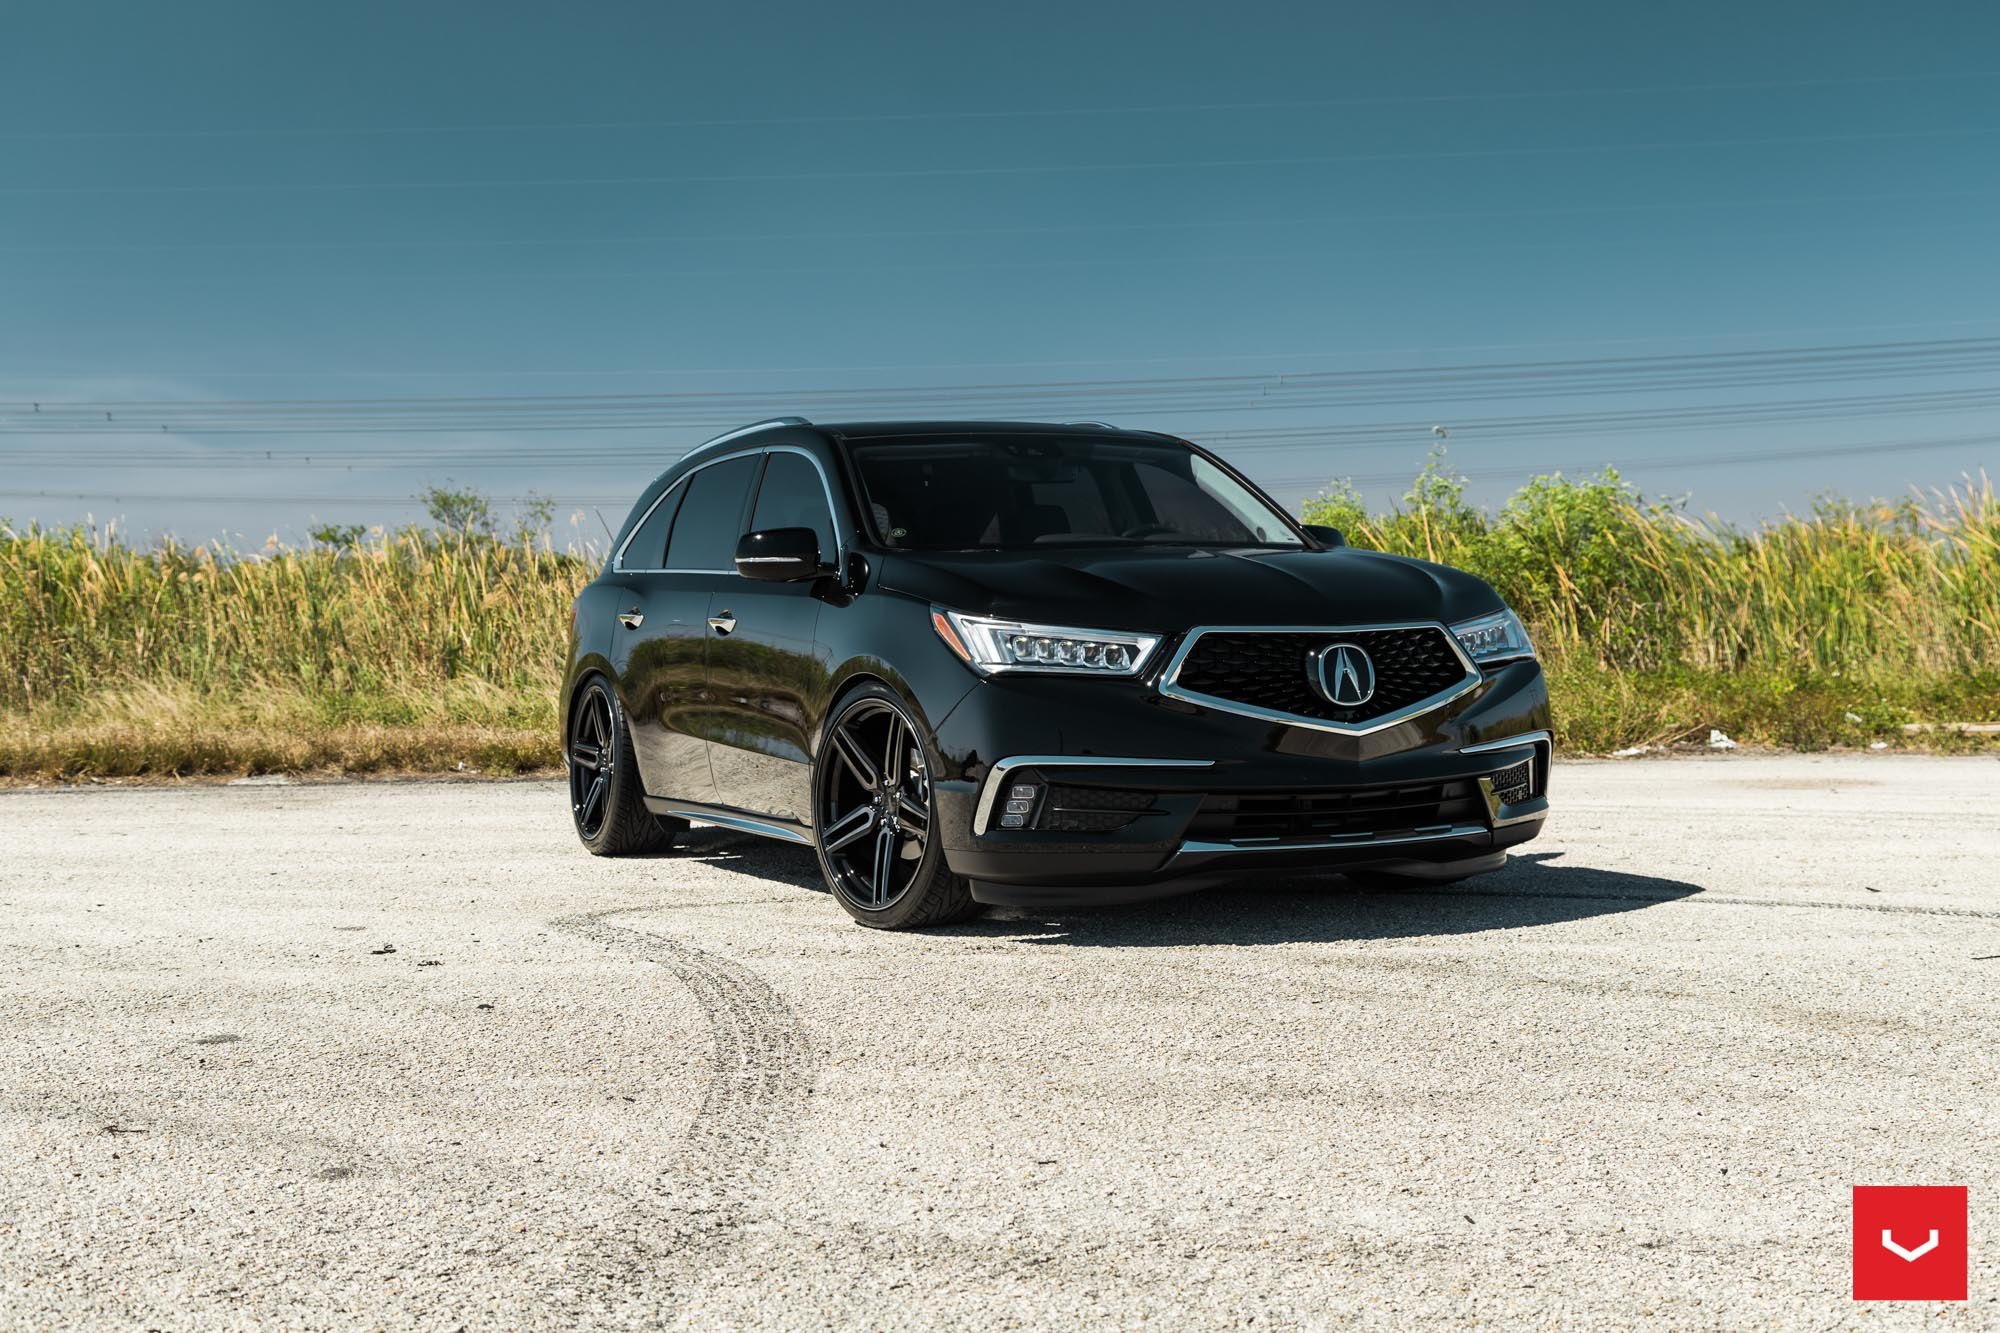 Black Acura MDX with Custom Crystal Clear Headlights - Photo by Vossen